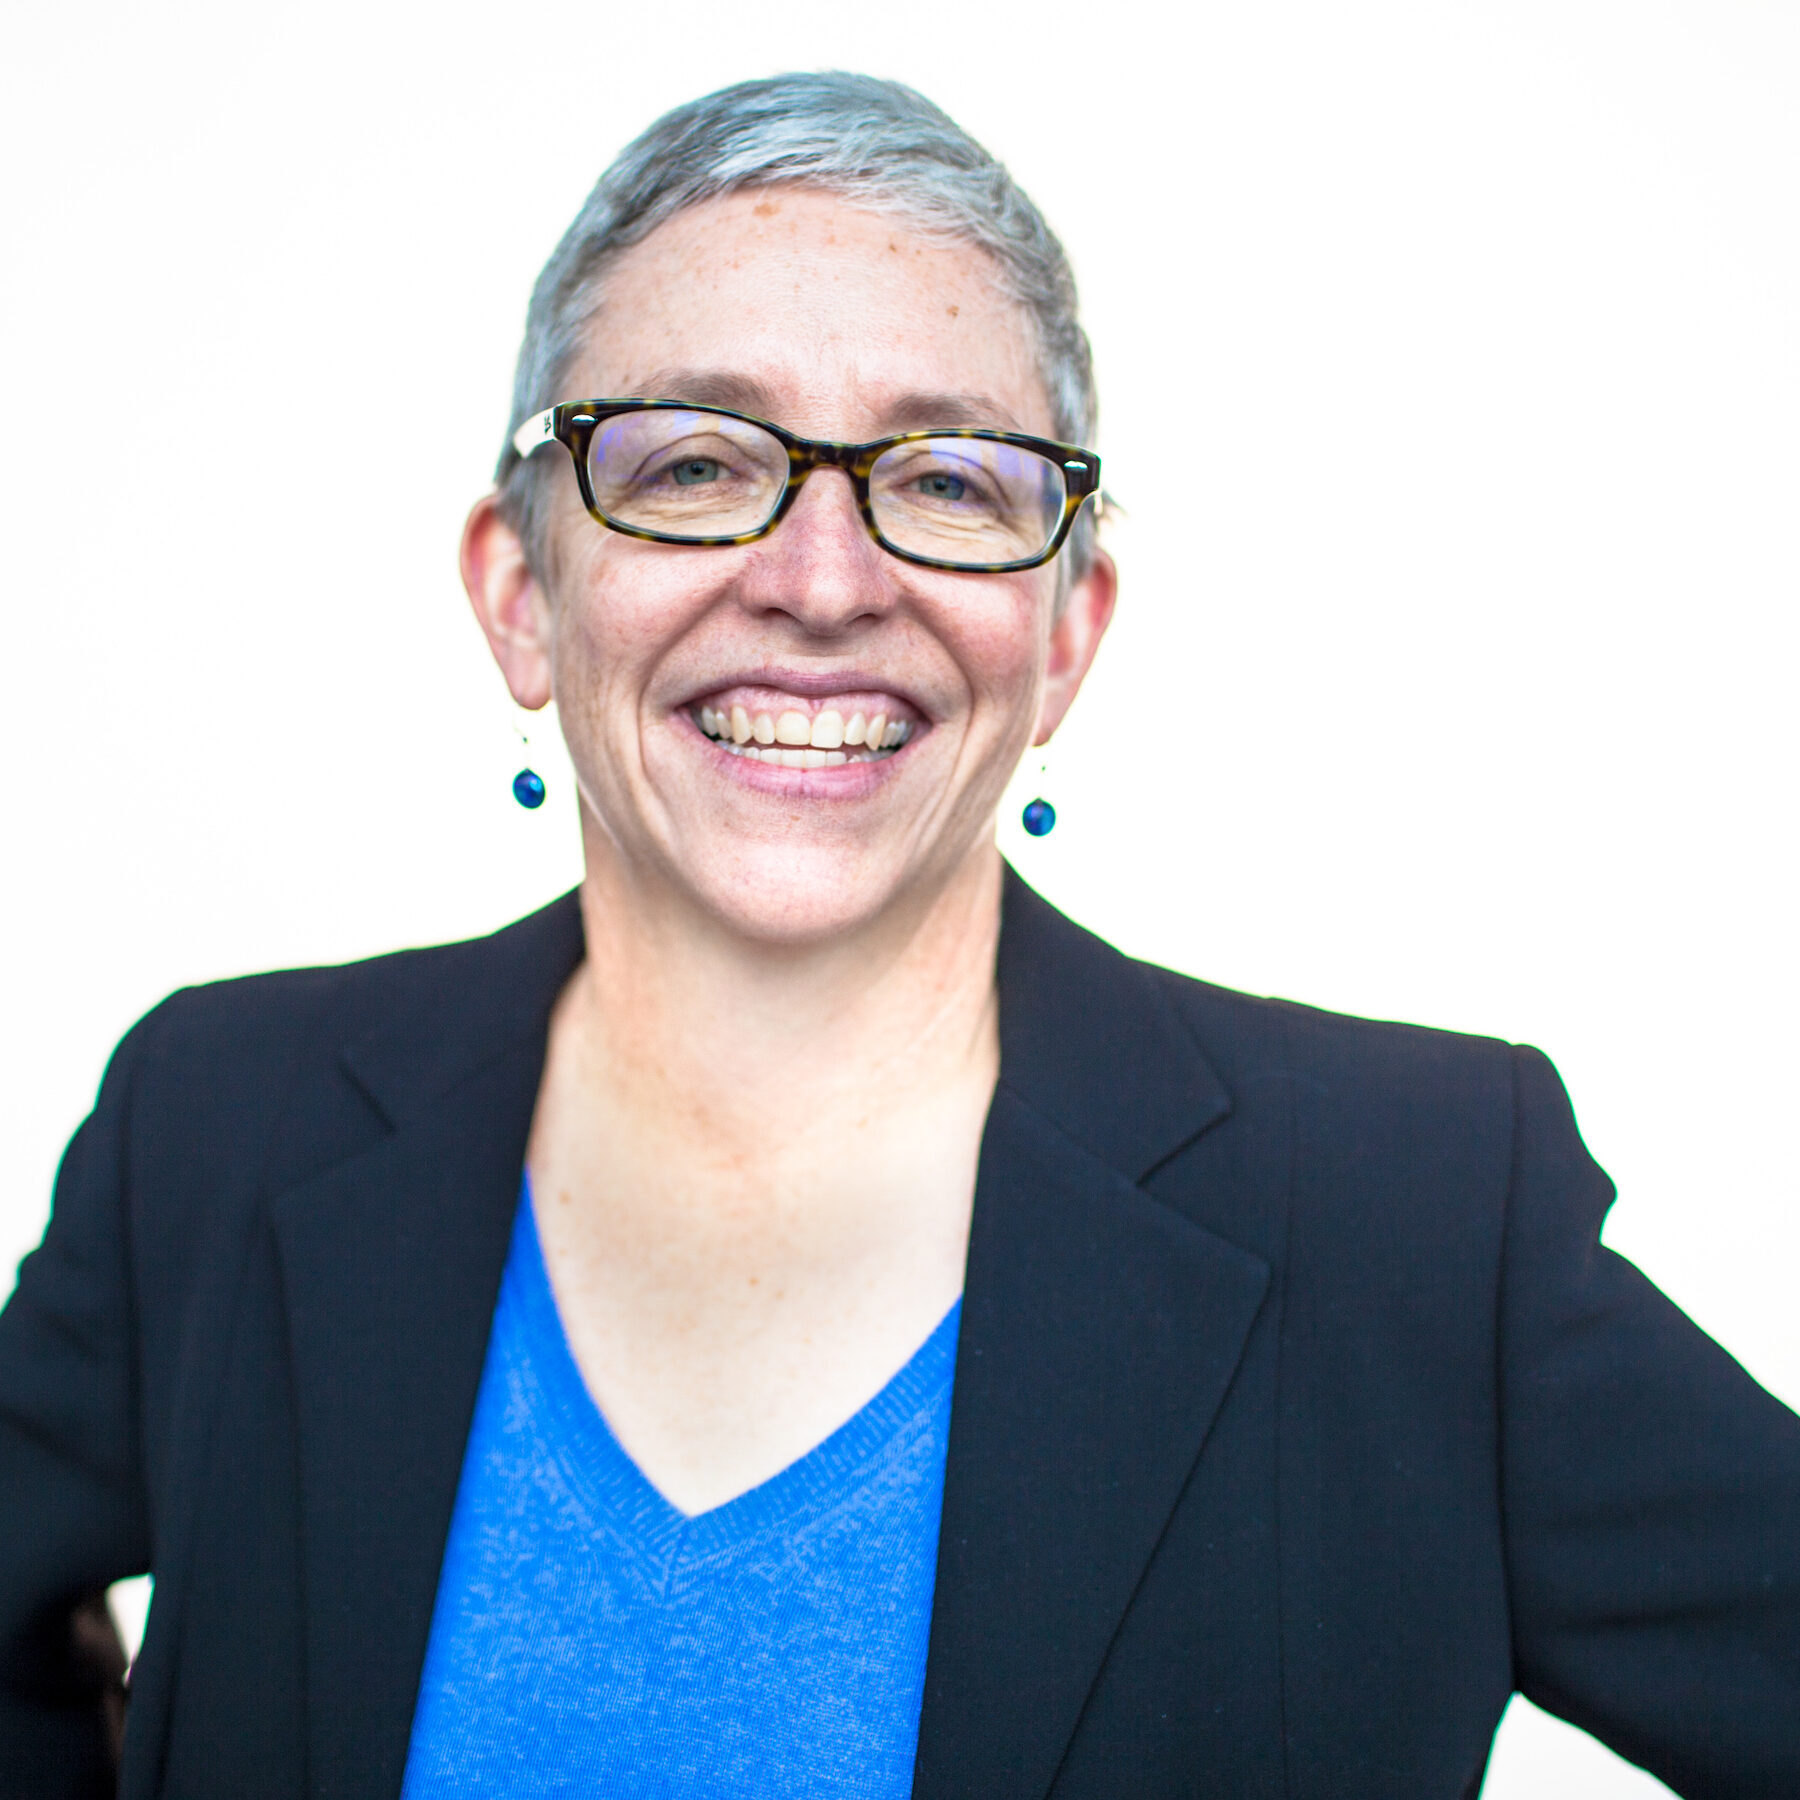 Photograph of Shari, a white woman with short silver hair wearing dark rectangular glasses. She is smiling and wearing a dark blazer over a blue v-neck shirt.